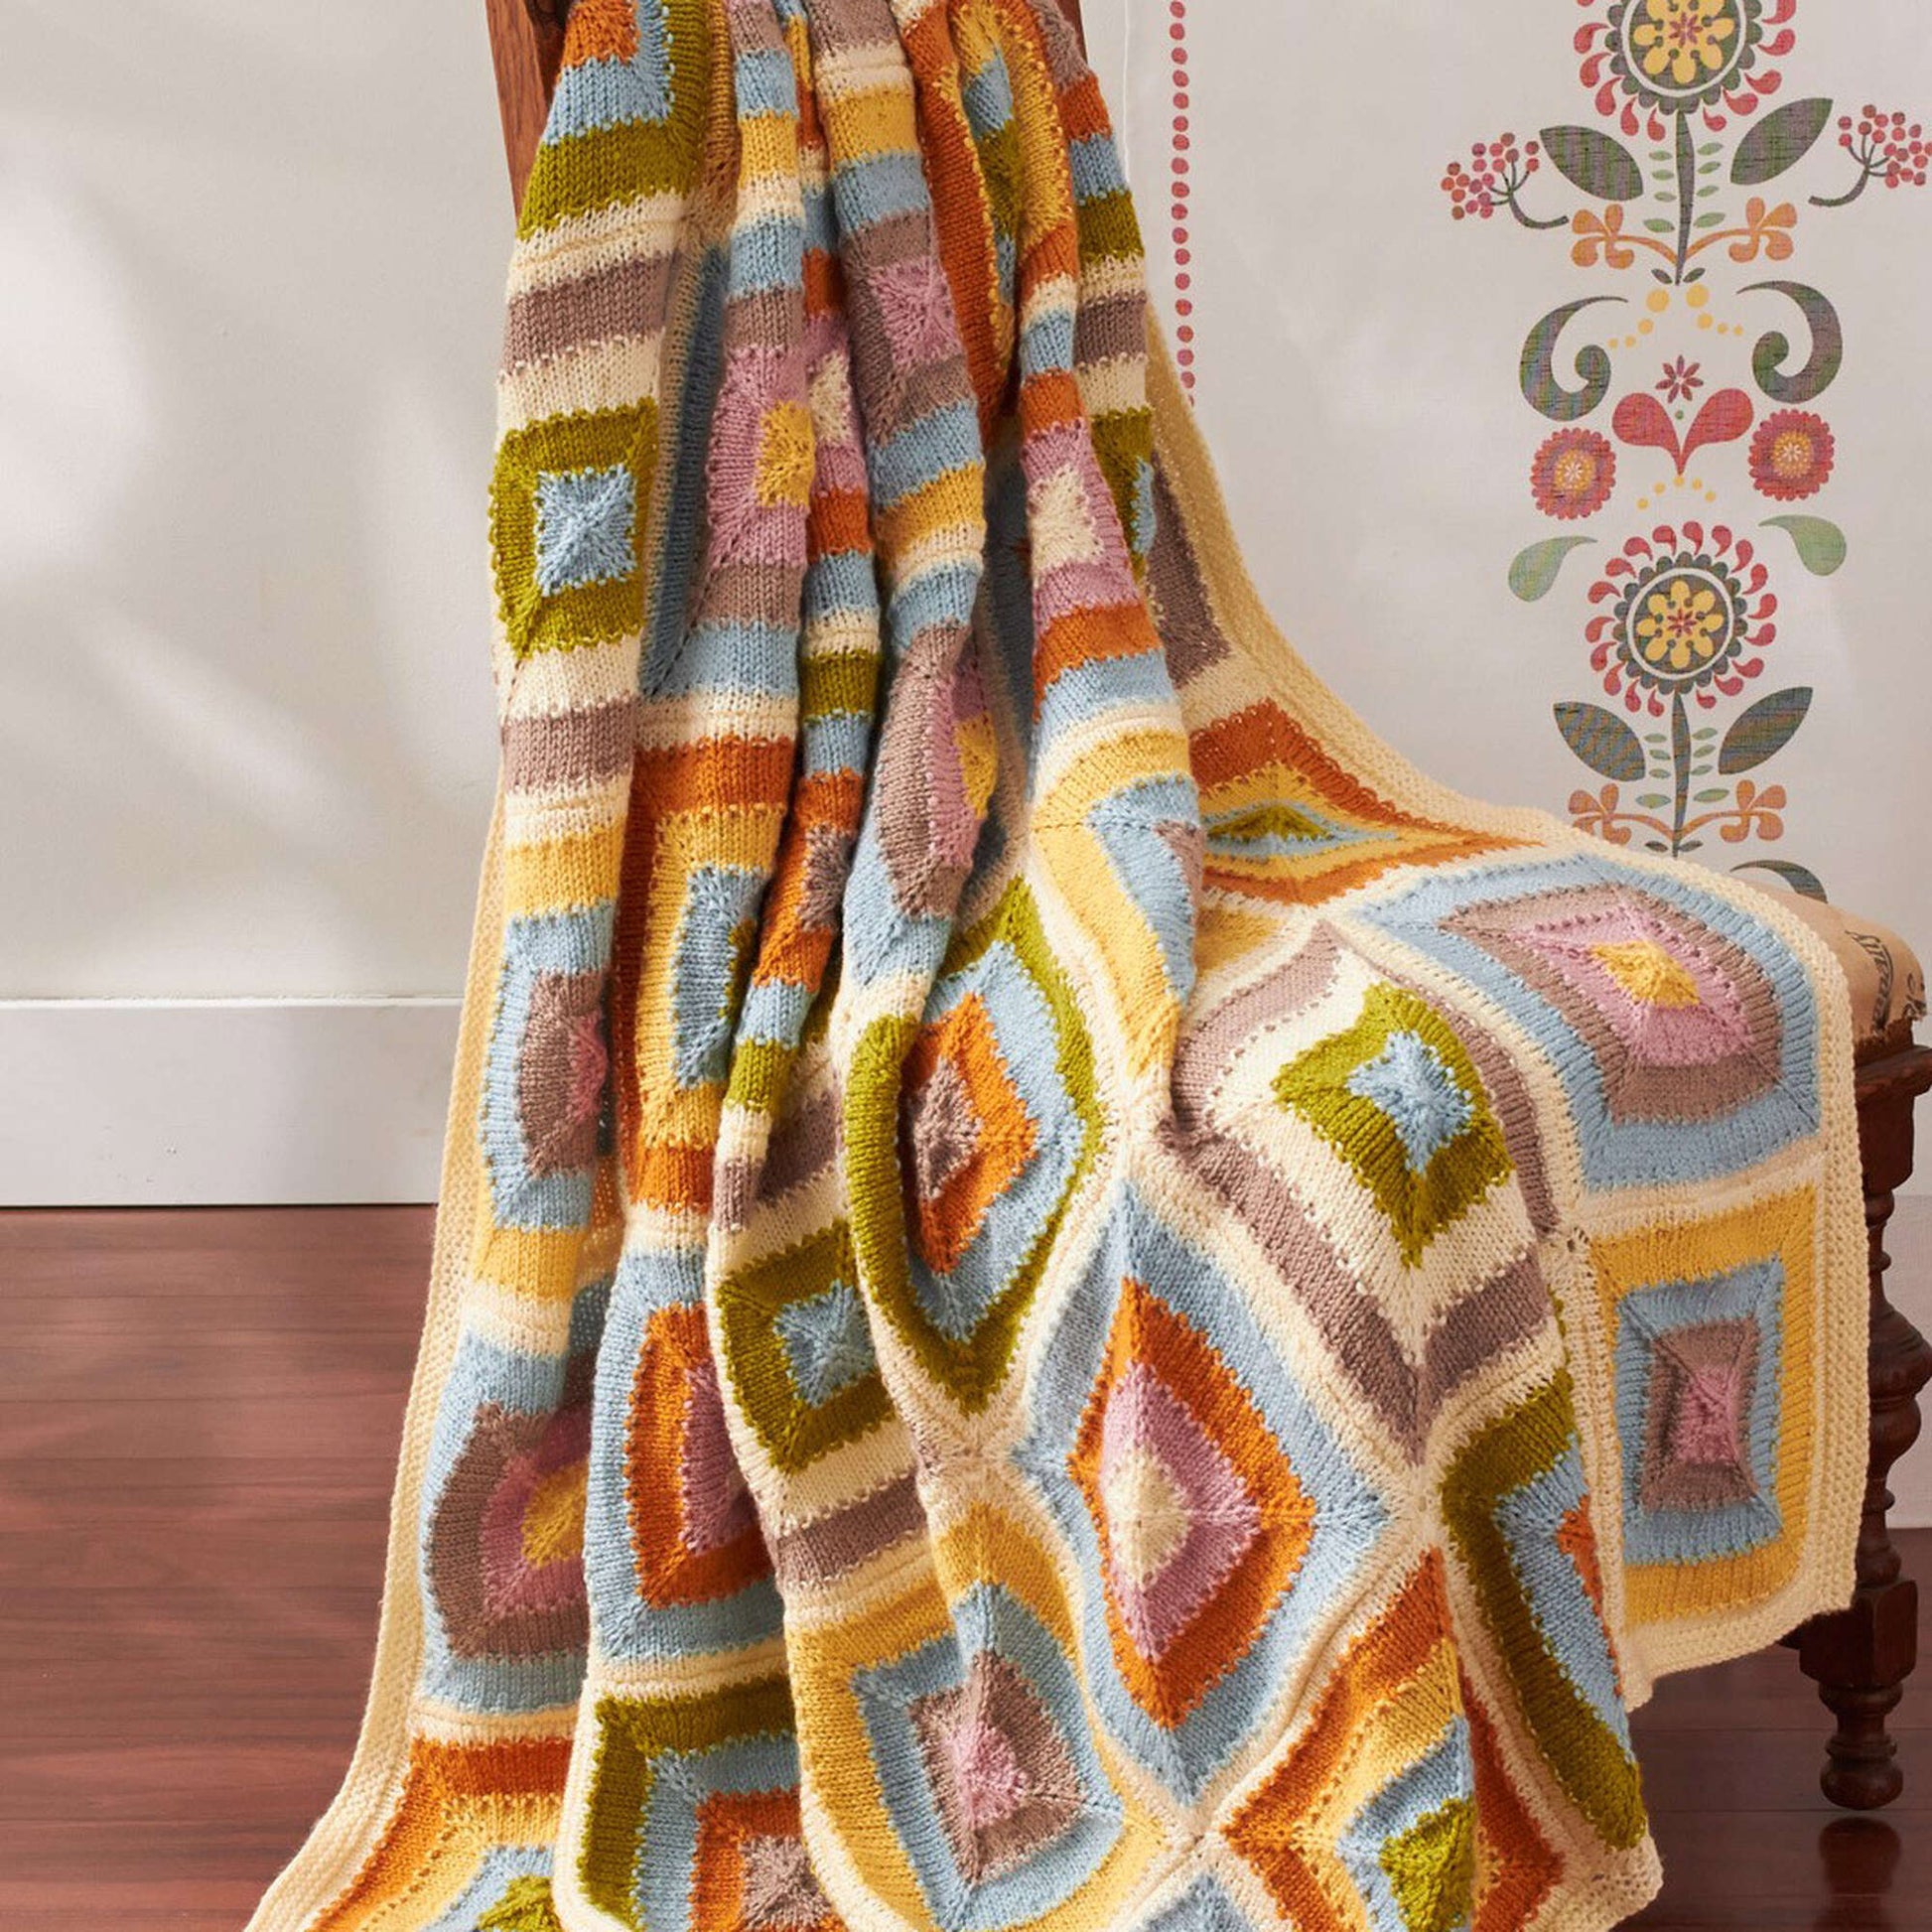 Free Patons Patchwork Knit Blanket Pattern